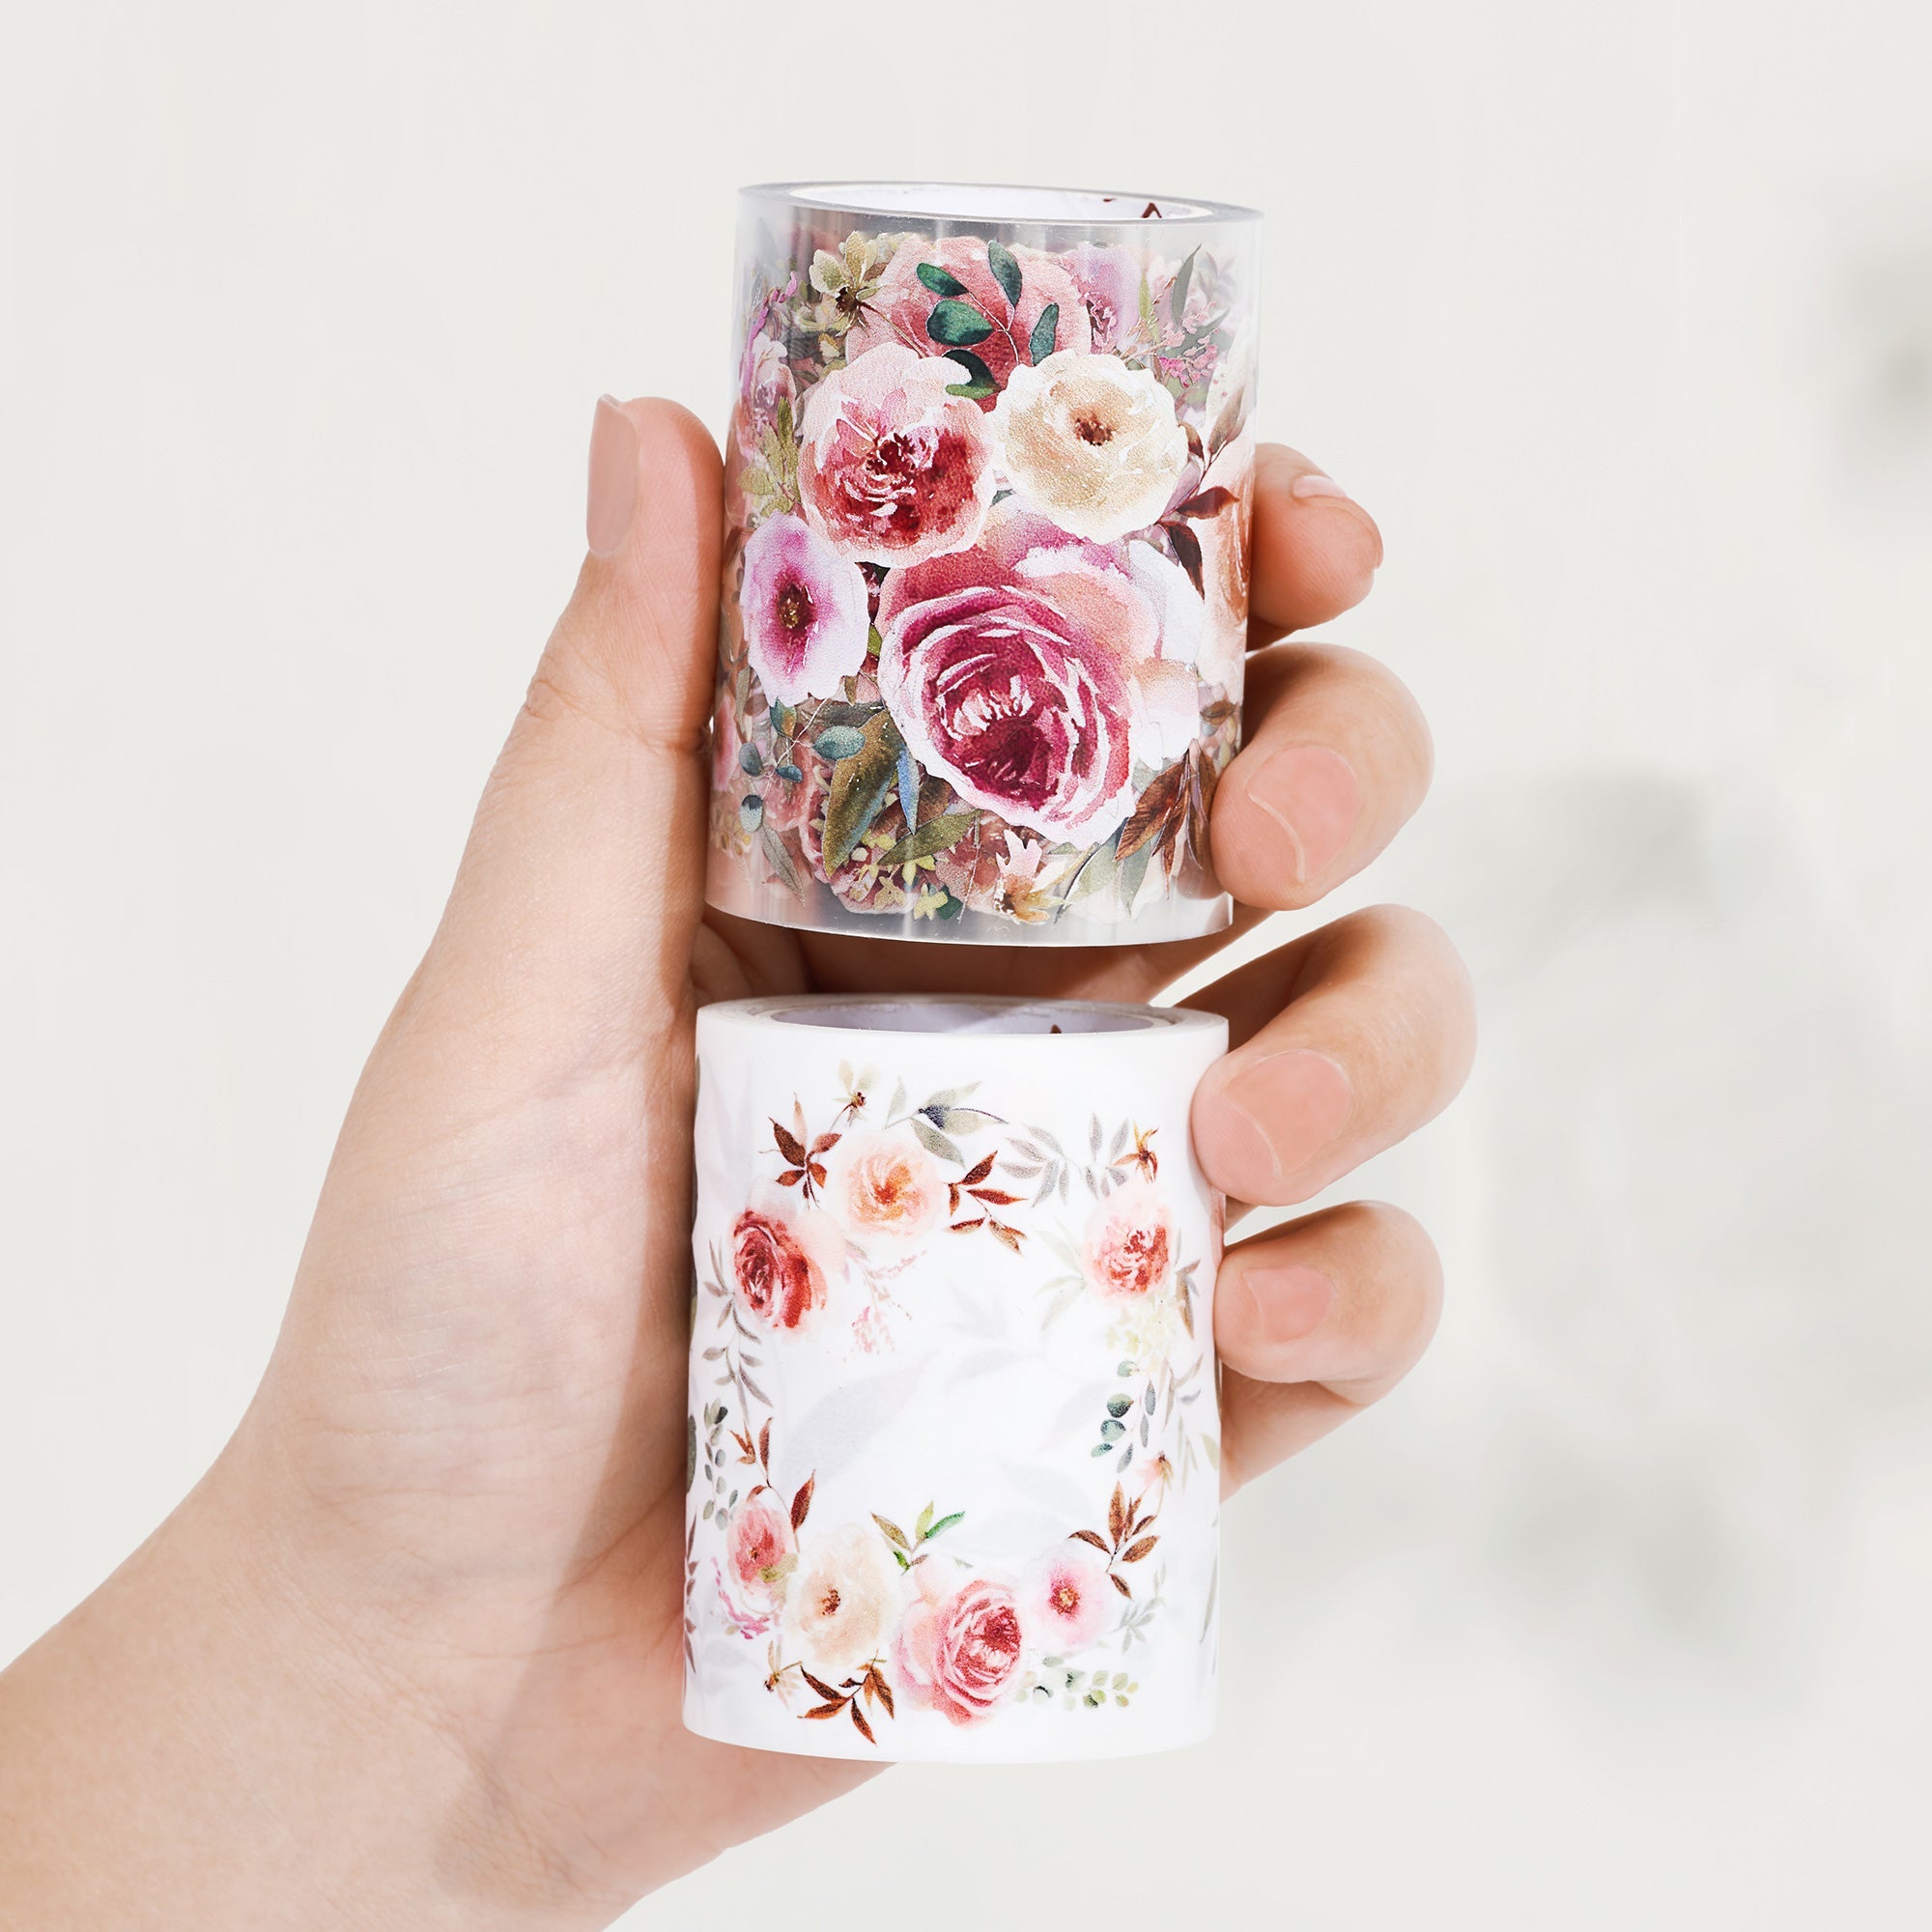  Fall Flowers Wide Washi / PET Tape by The Washi Tape Shop The Washi Tape Shop Perfumarie